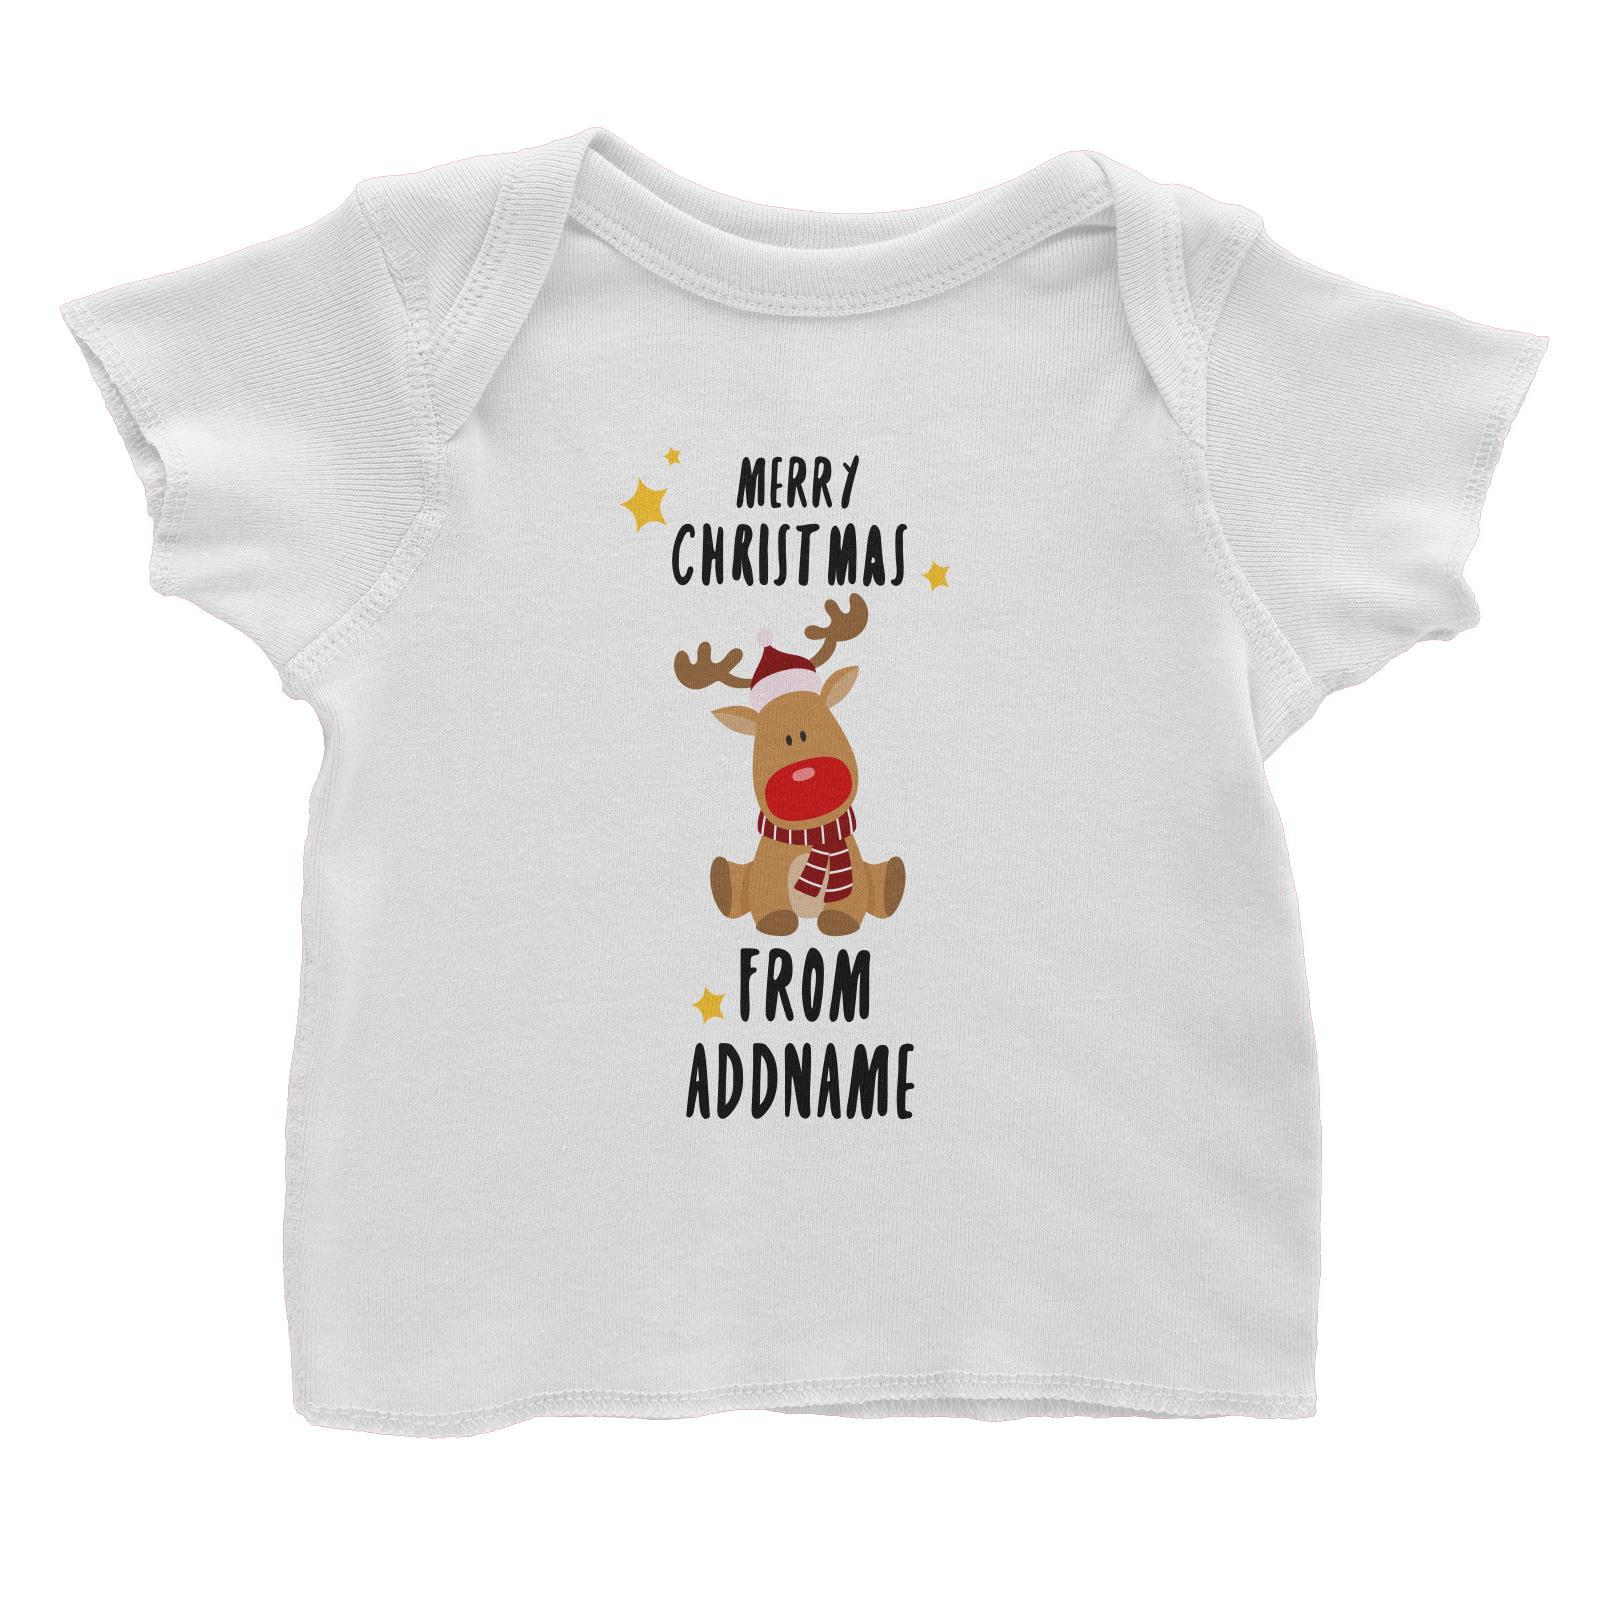 Cute Rudolph Merry Christmas Greeting Addname Baby T-Shirt  Animal Personalizable Designs Matching Family